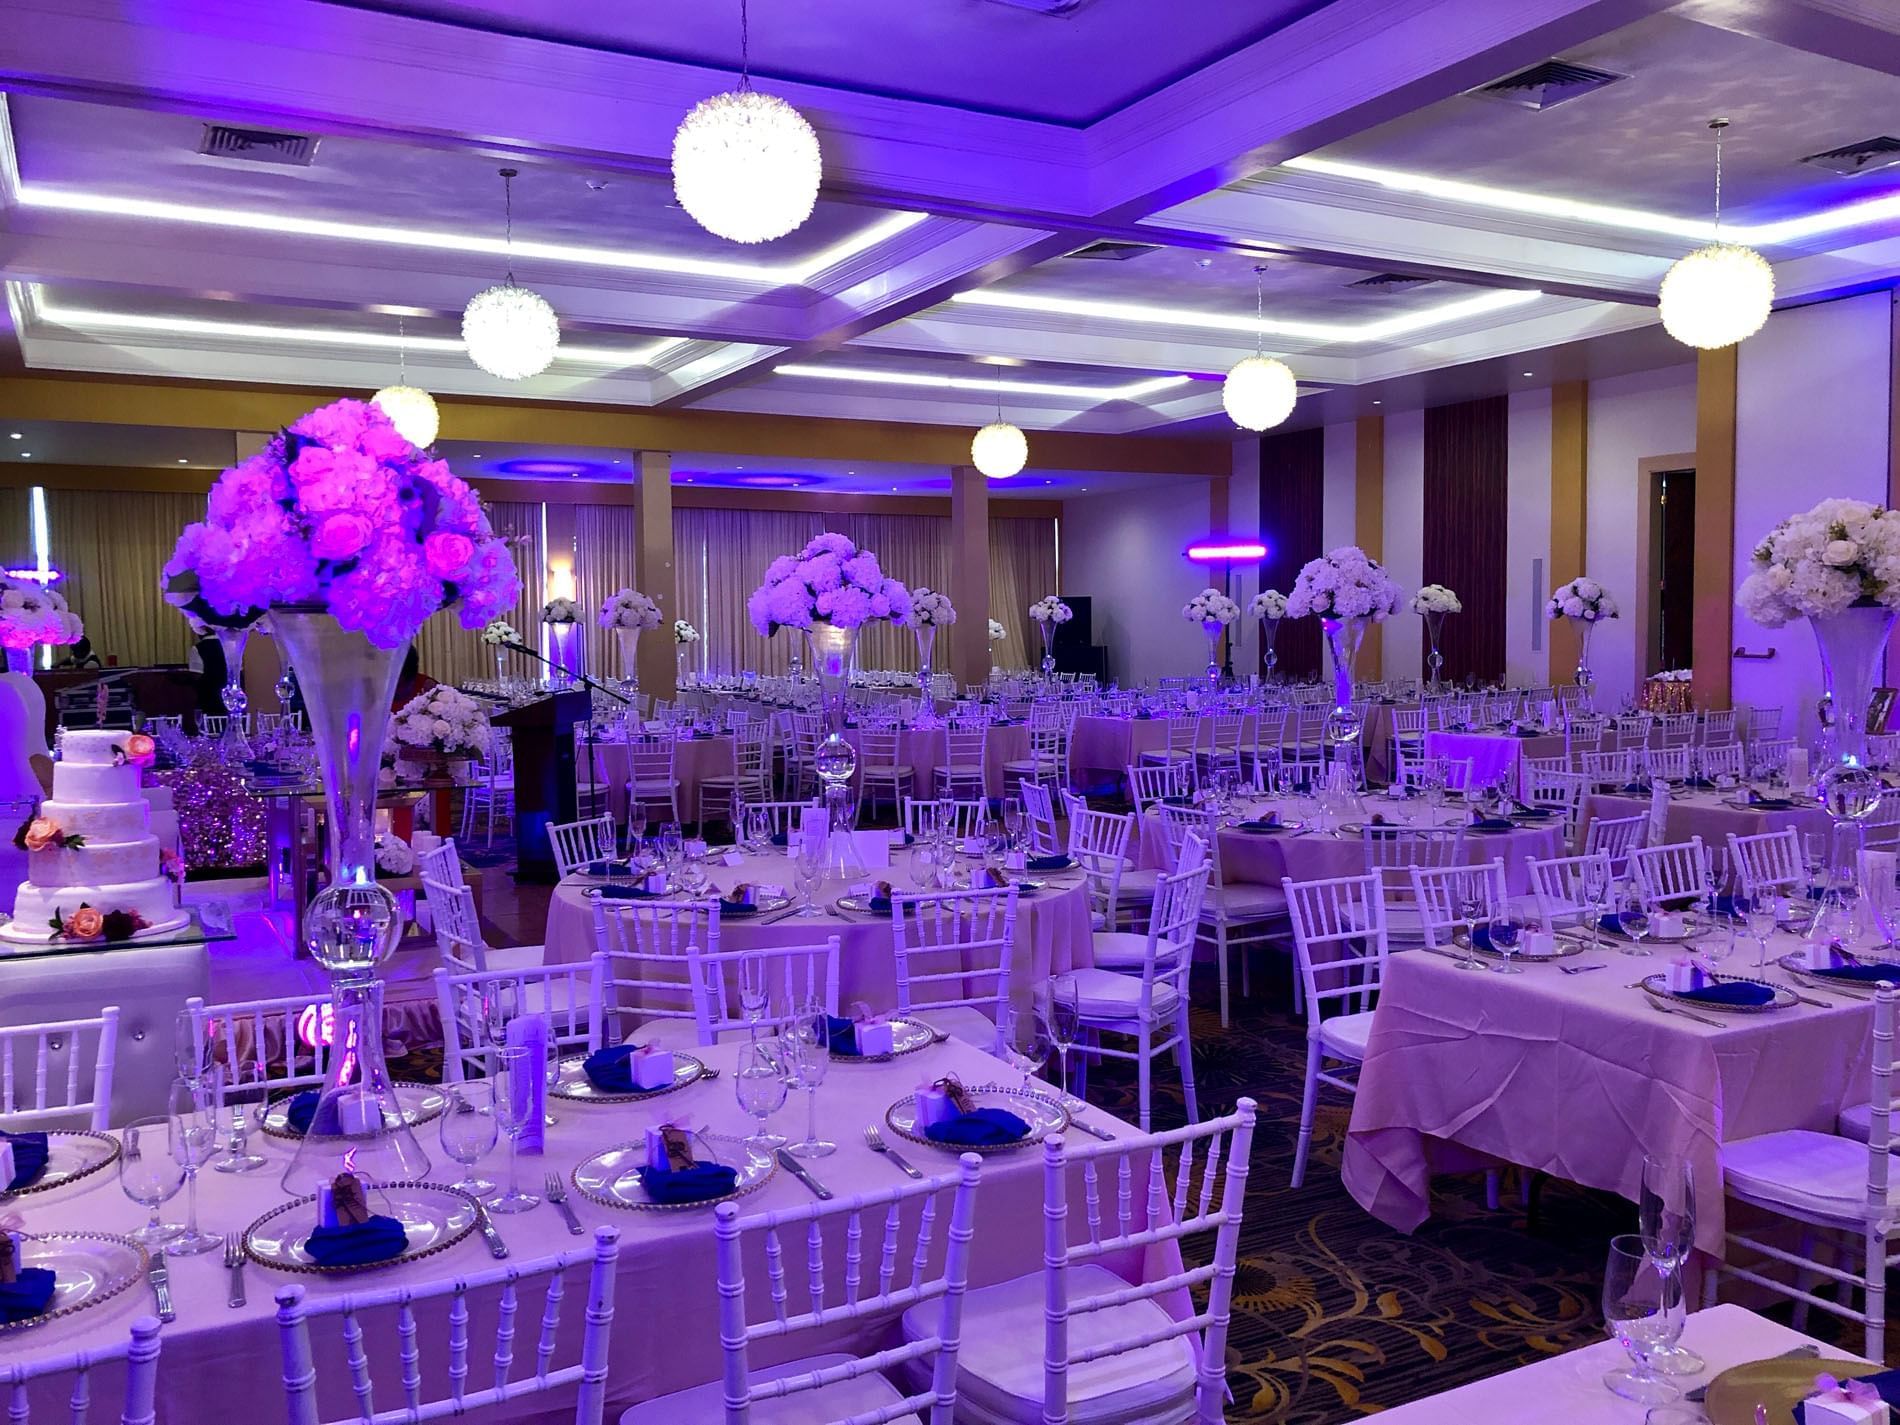 Event space with tables, cutlery & chairs, Pegasus Hotel Guyana